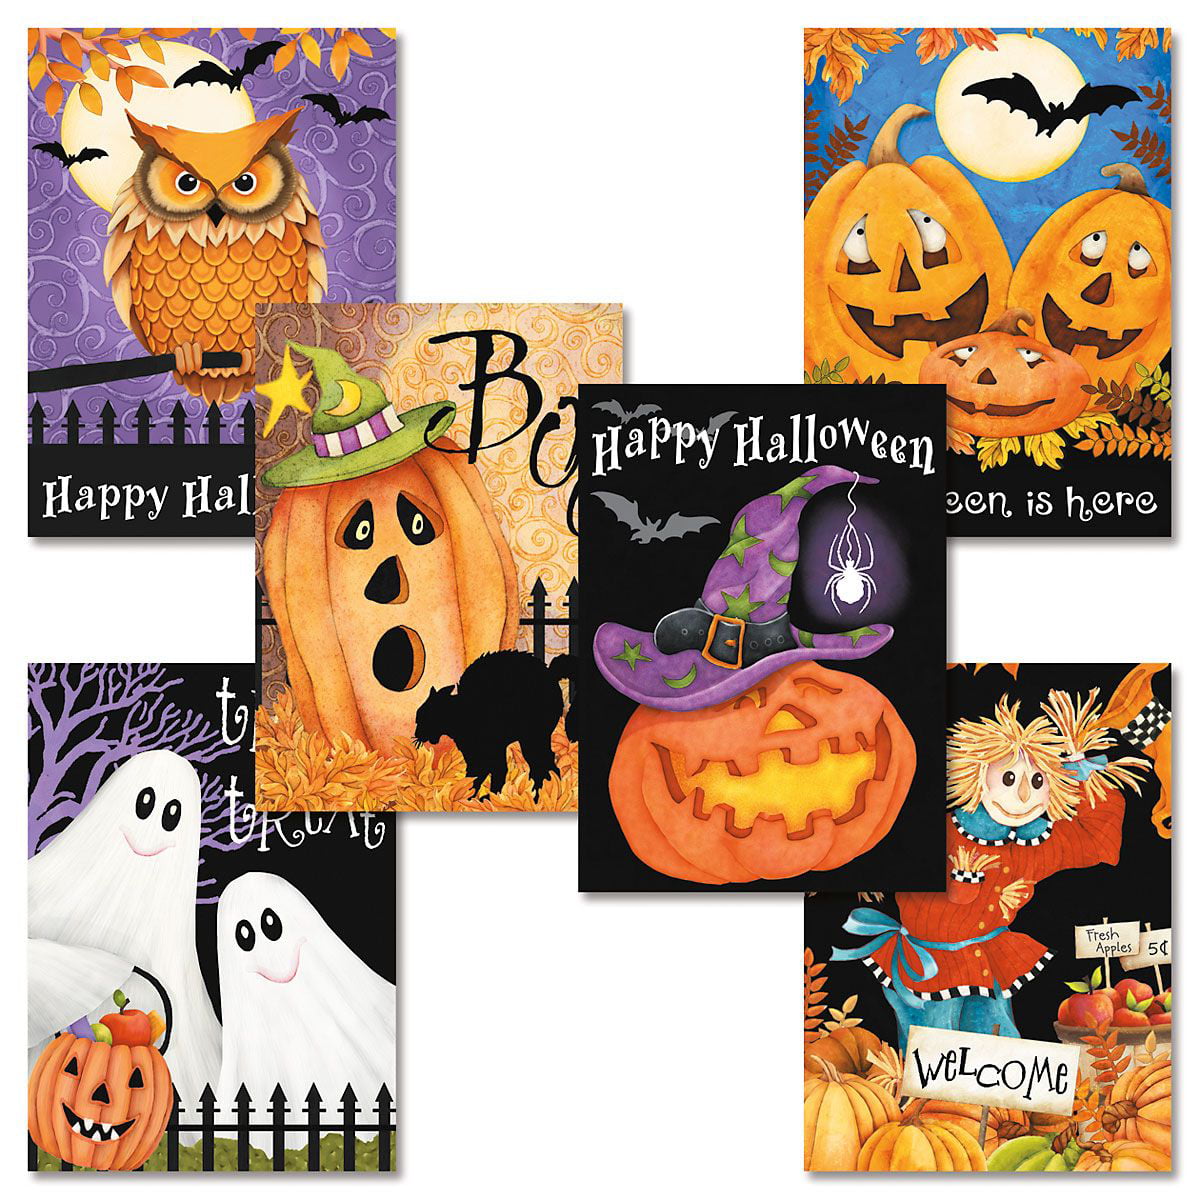 Pack/LOT of 6 Halloween Cards w/ Envelopes-Incredible value